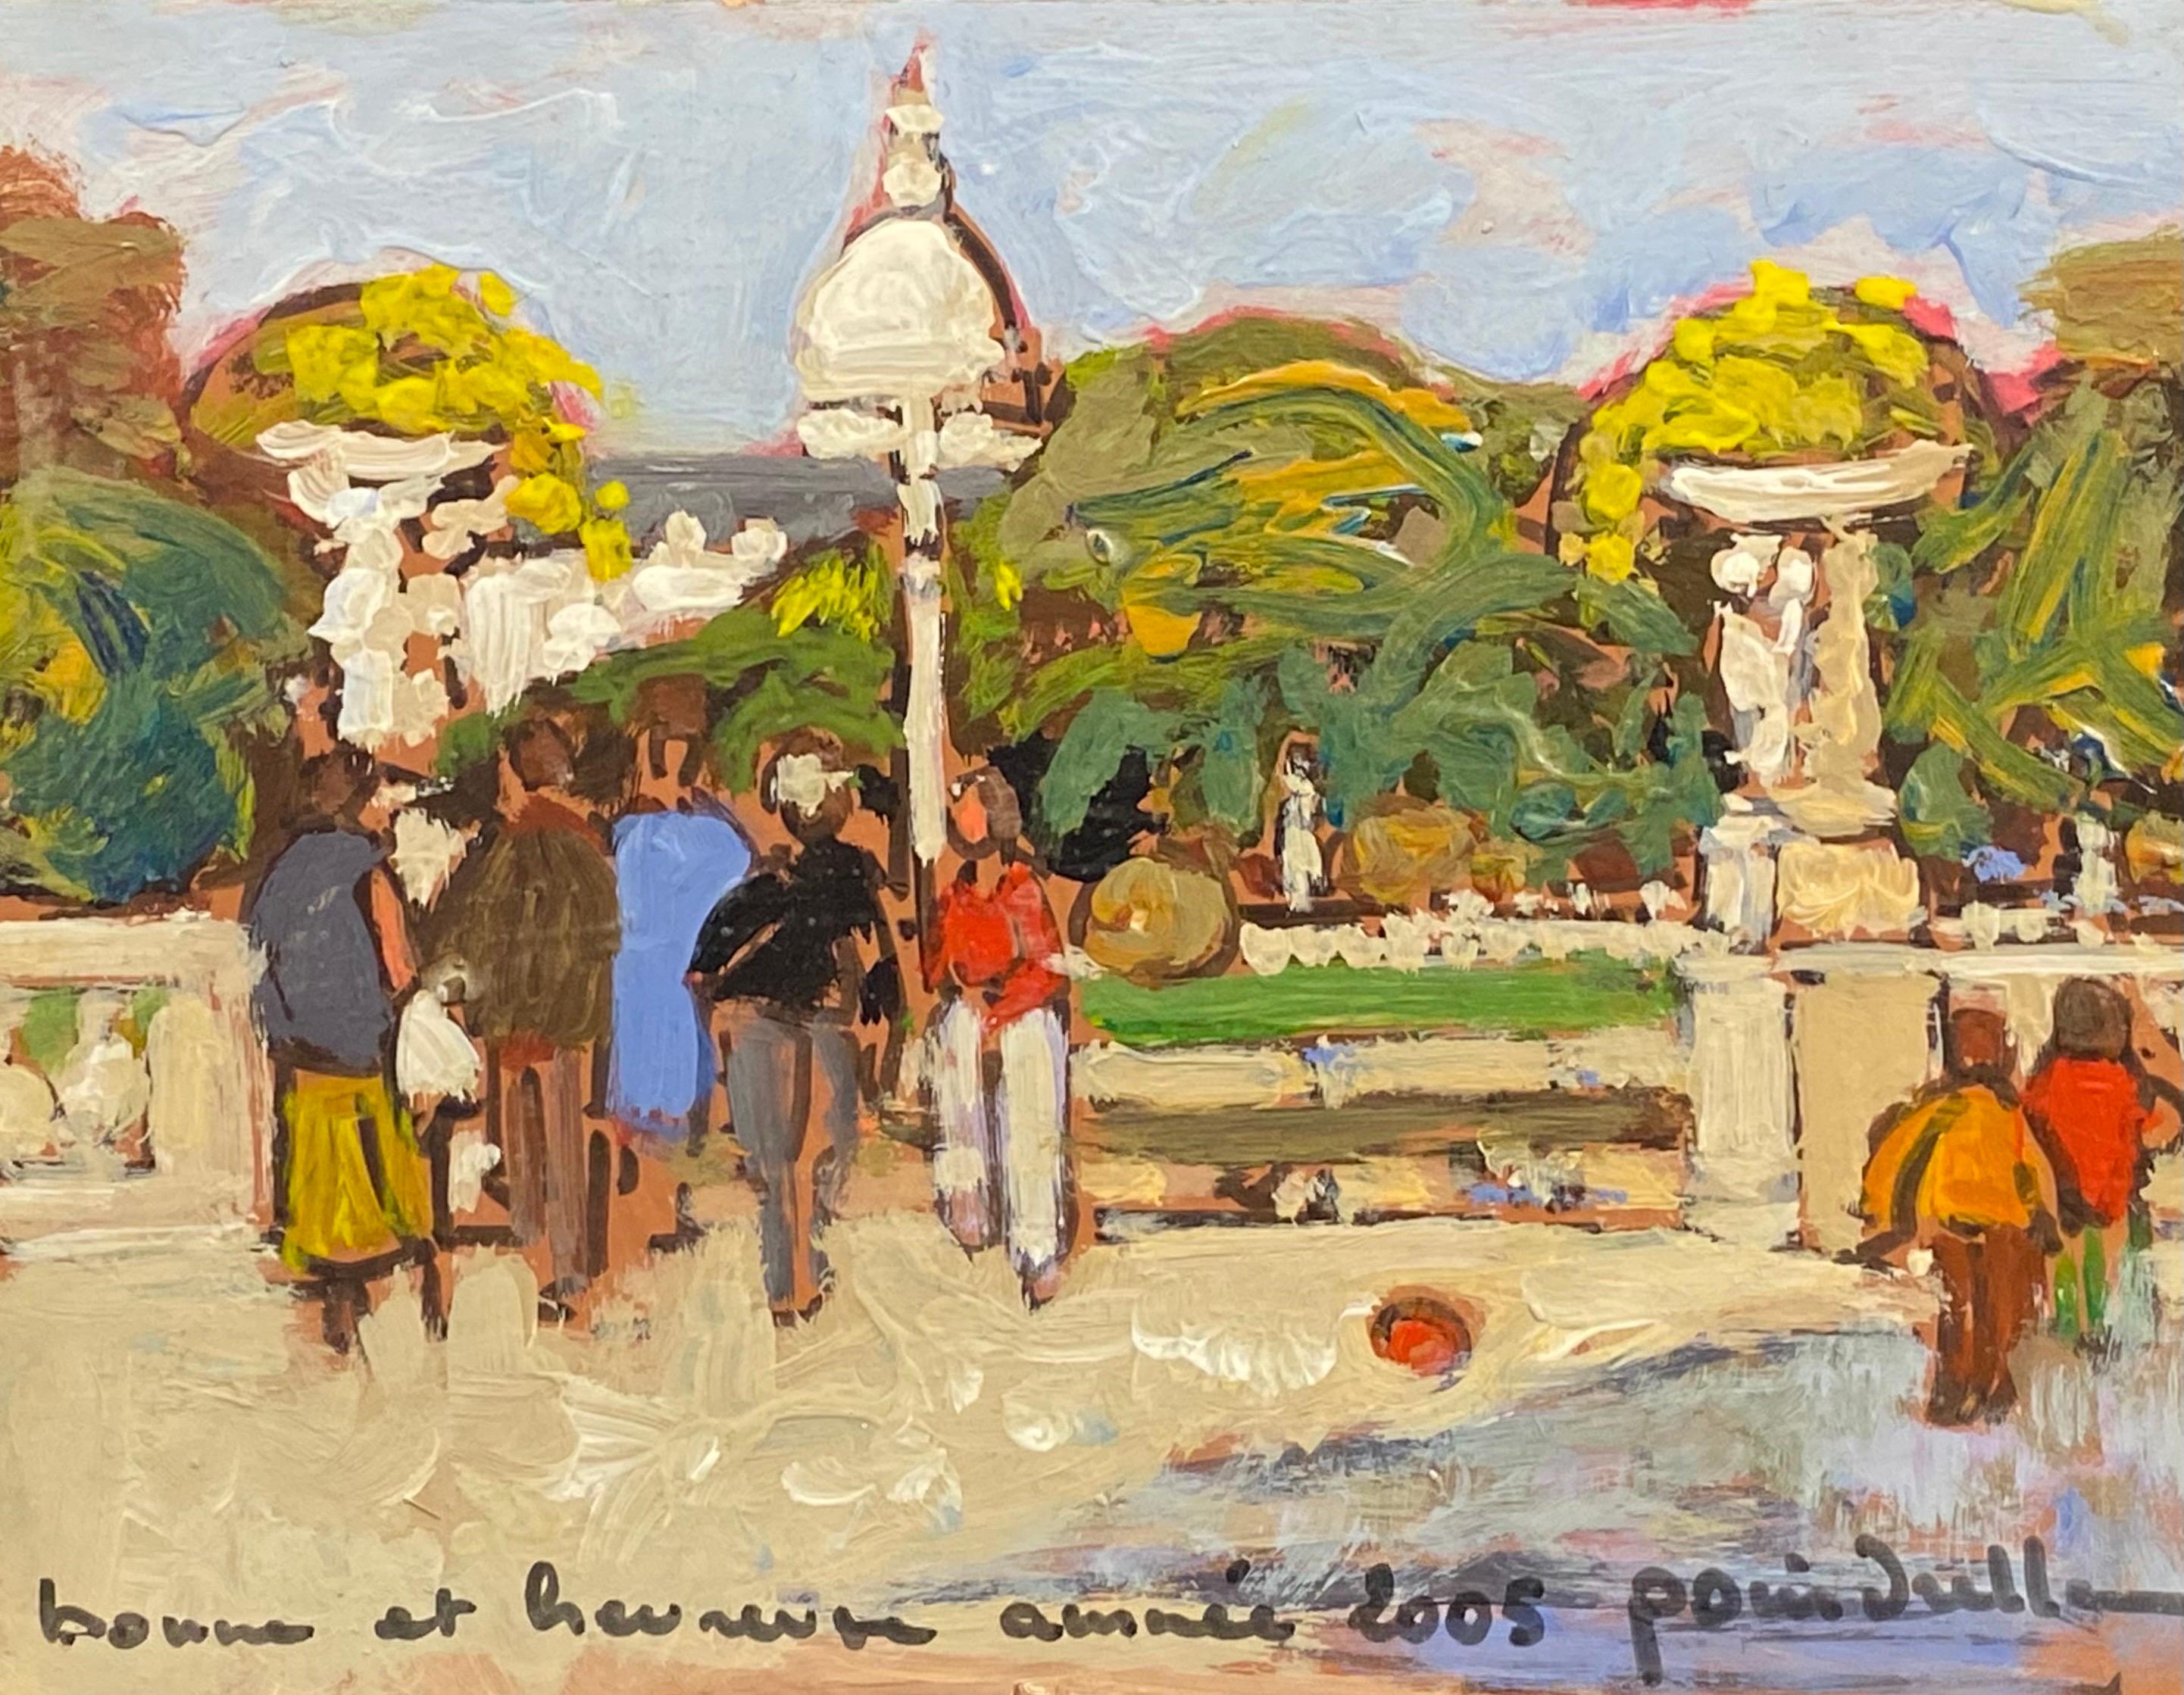 Patrice Poindrelle Landscape Painting - Luxembourg Gardens Paris, Signed Impressionist French Oil Painting with figures